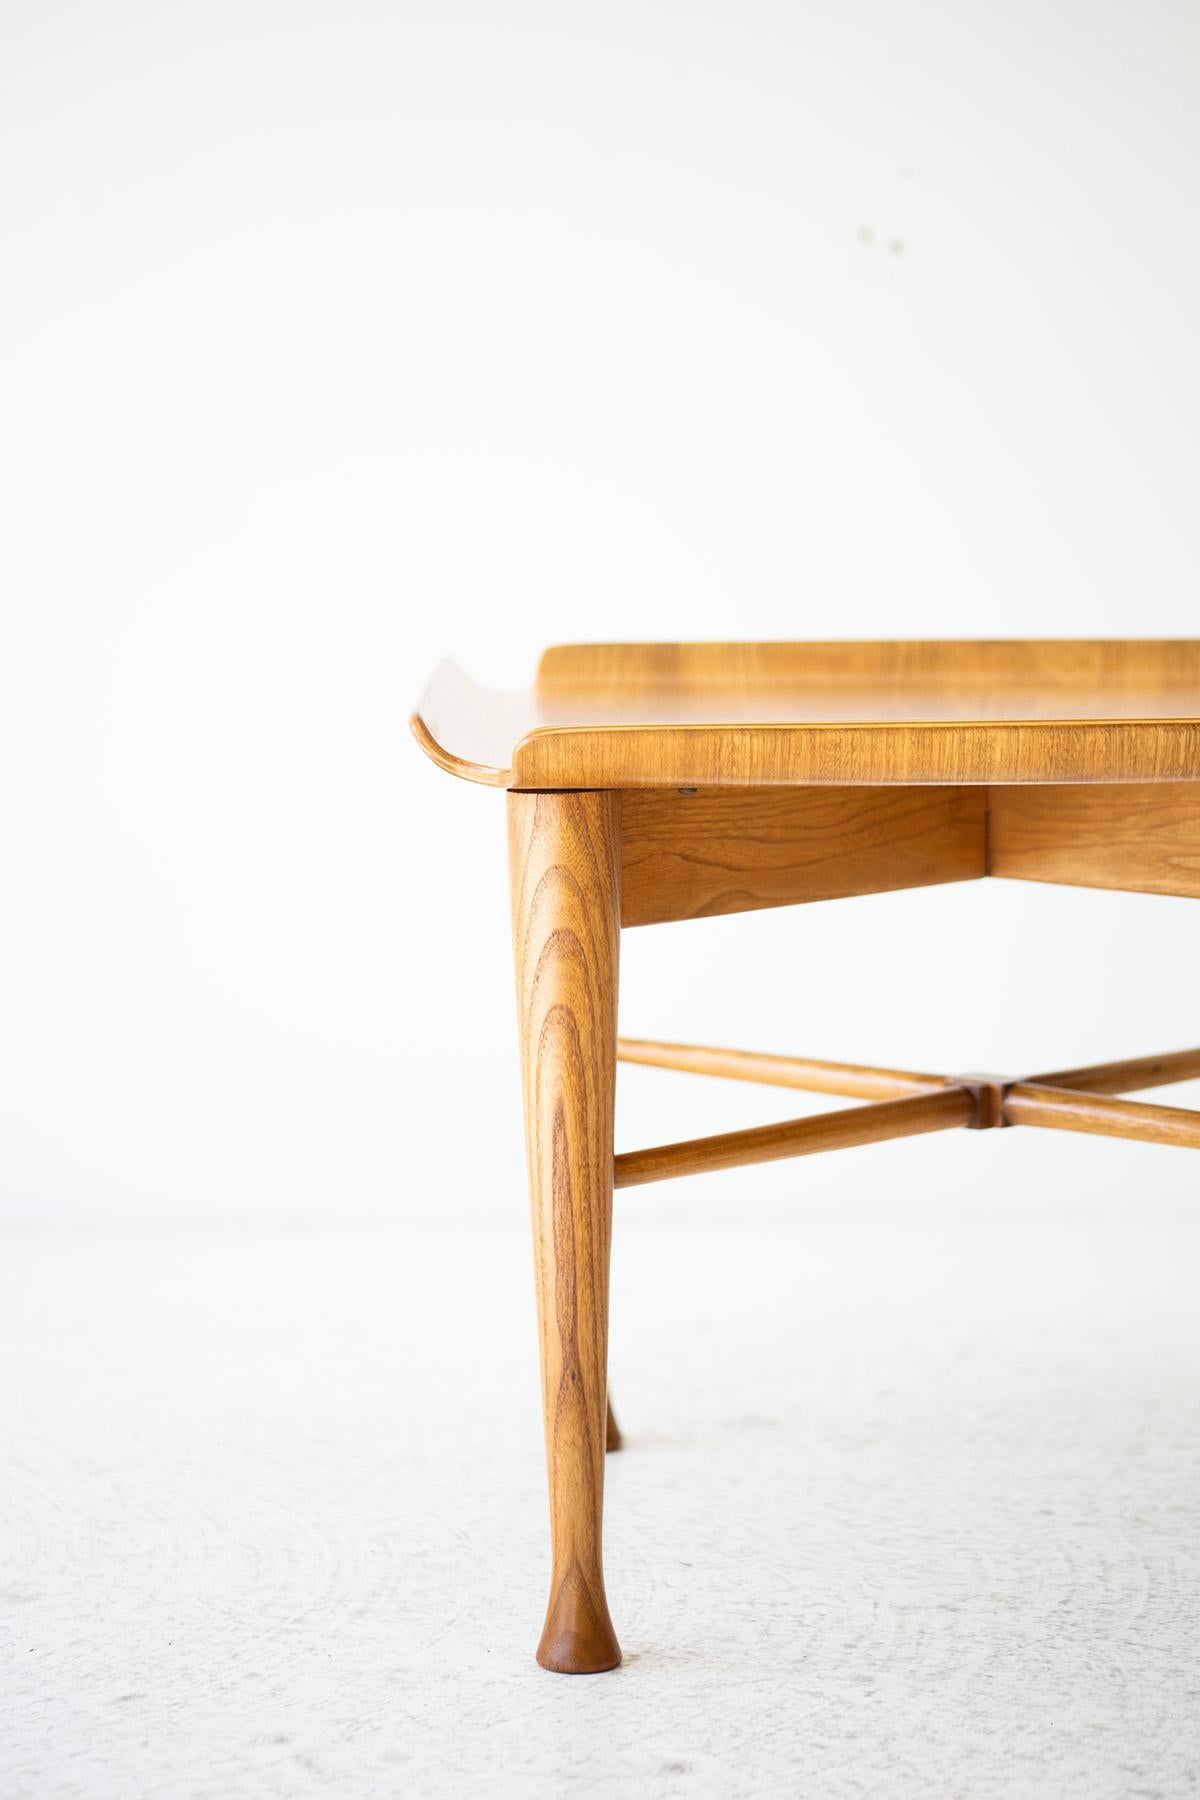 Designer: Lawrence Peabody 

Manufacturer: Richardson Nemschoff 
Period/Model: Mid-Century Modern 
Specs: Elm 

This Lawrence Peabody side table for Richardson Nemschoff are in excellent restored condition. The elm wood has been professionally